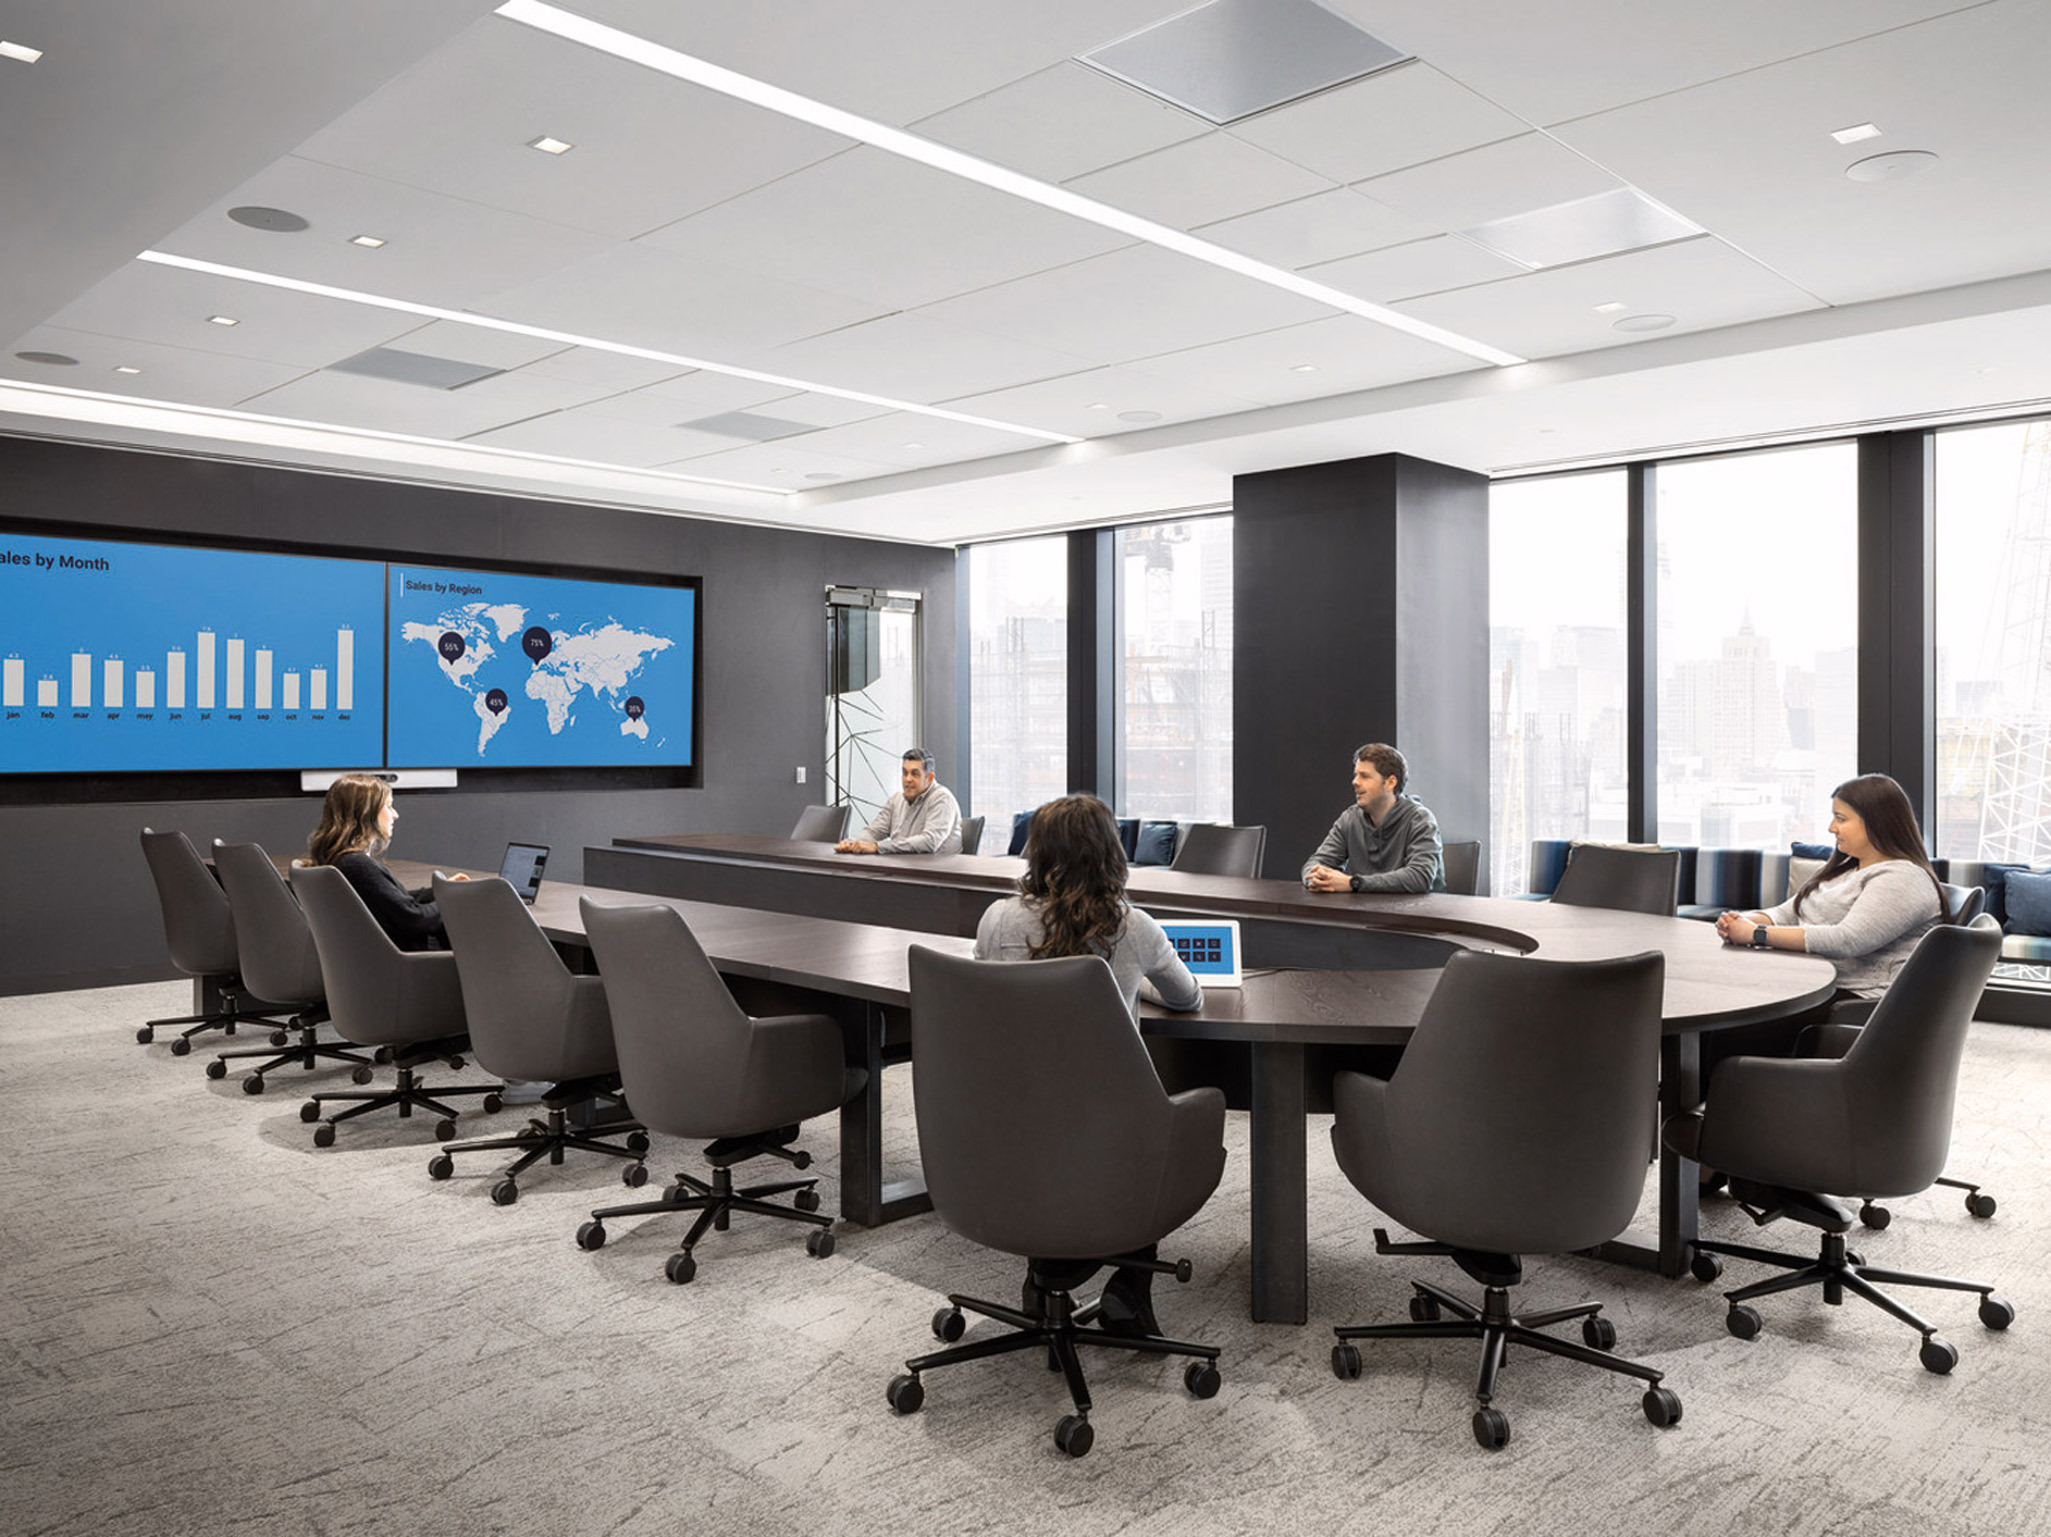 Modern conference room with a long oval table, ergonomic chairs, and a wall-mounted digital presentation screen. Natural light fills the room from floor-to-ceiling windows, complementing the subtle grey and blue color scheme.